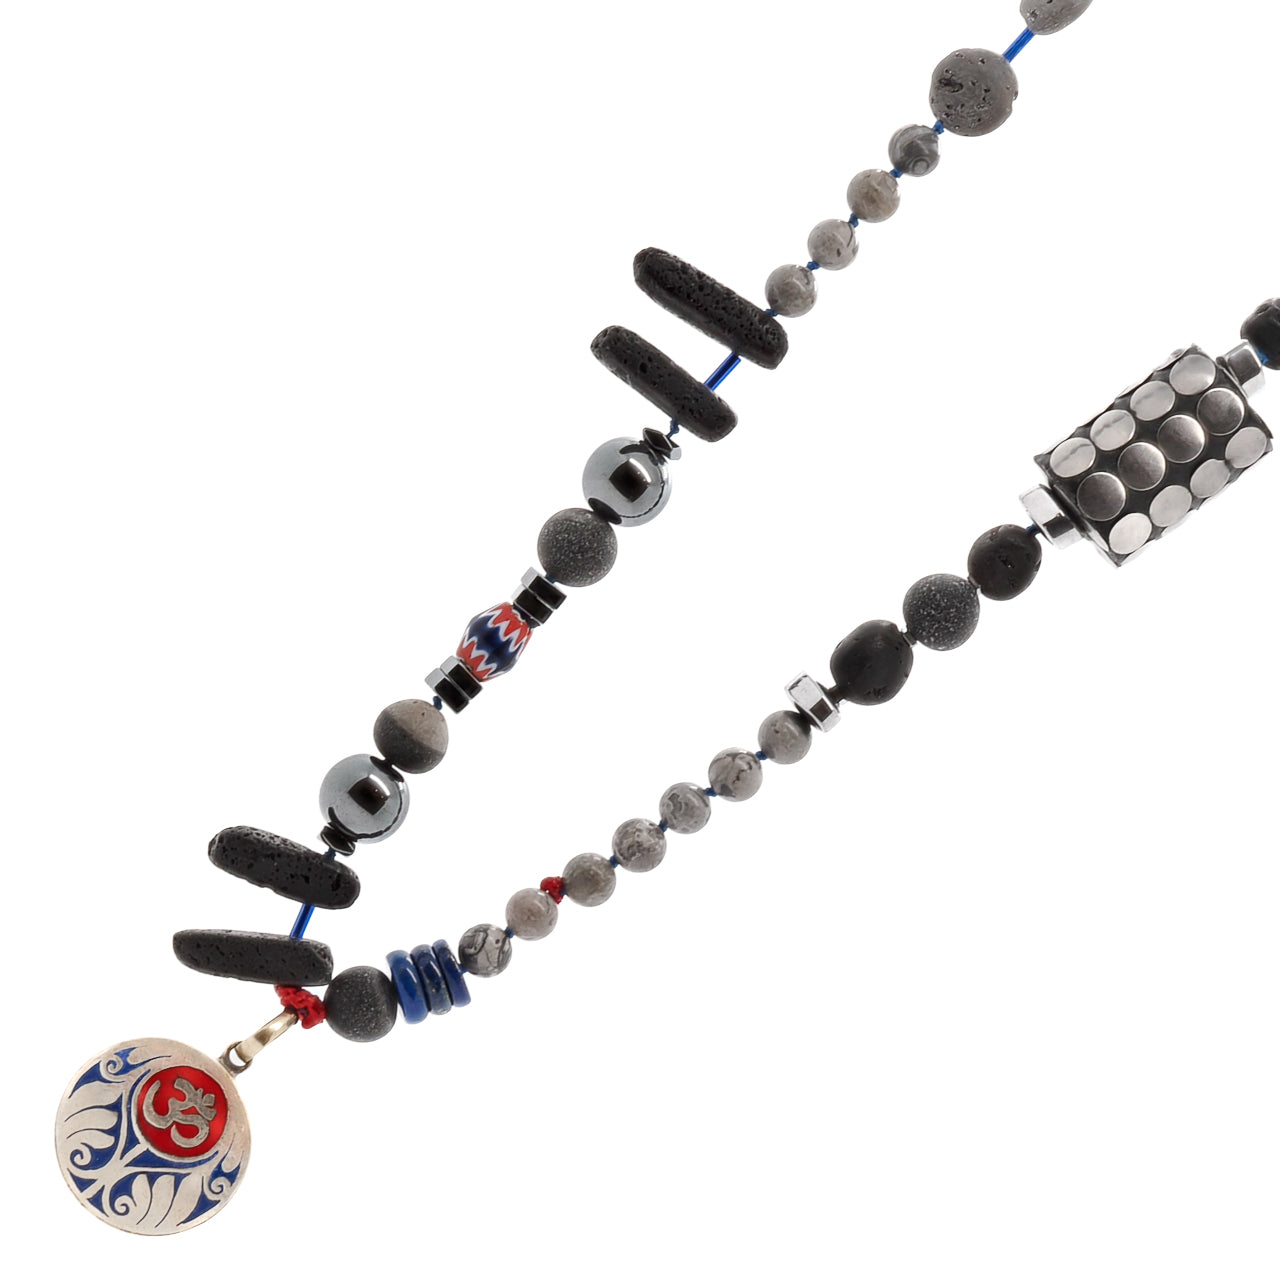 Stand out with the Tibetan Om Necklace, a symbol of inner peace and connection, beautifully captured in its design.